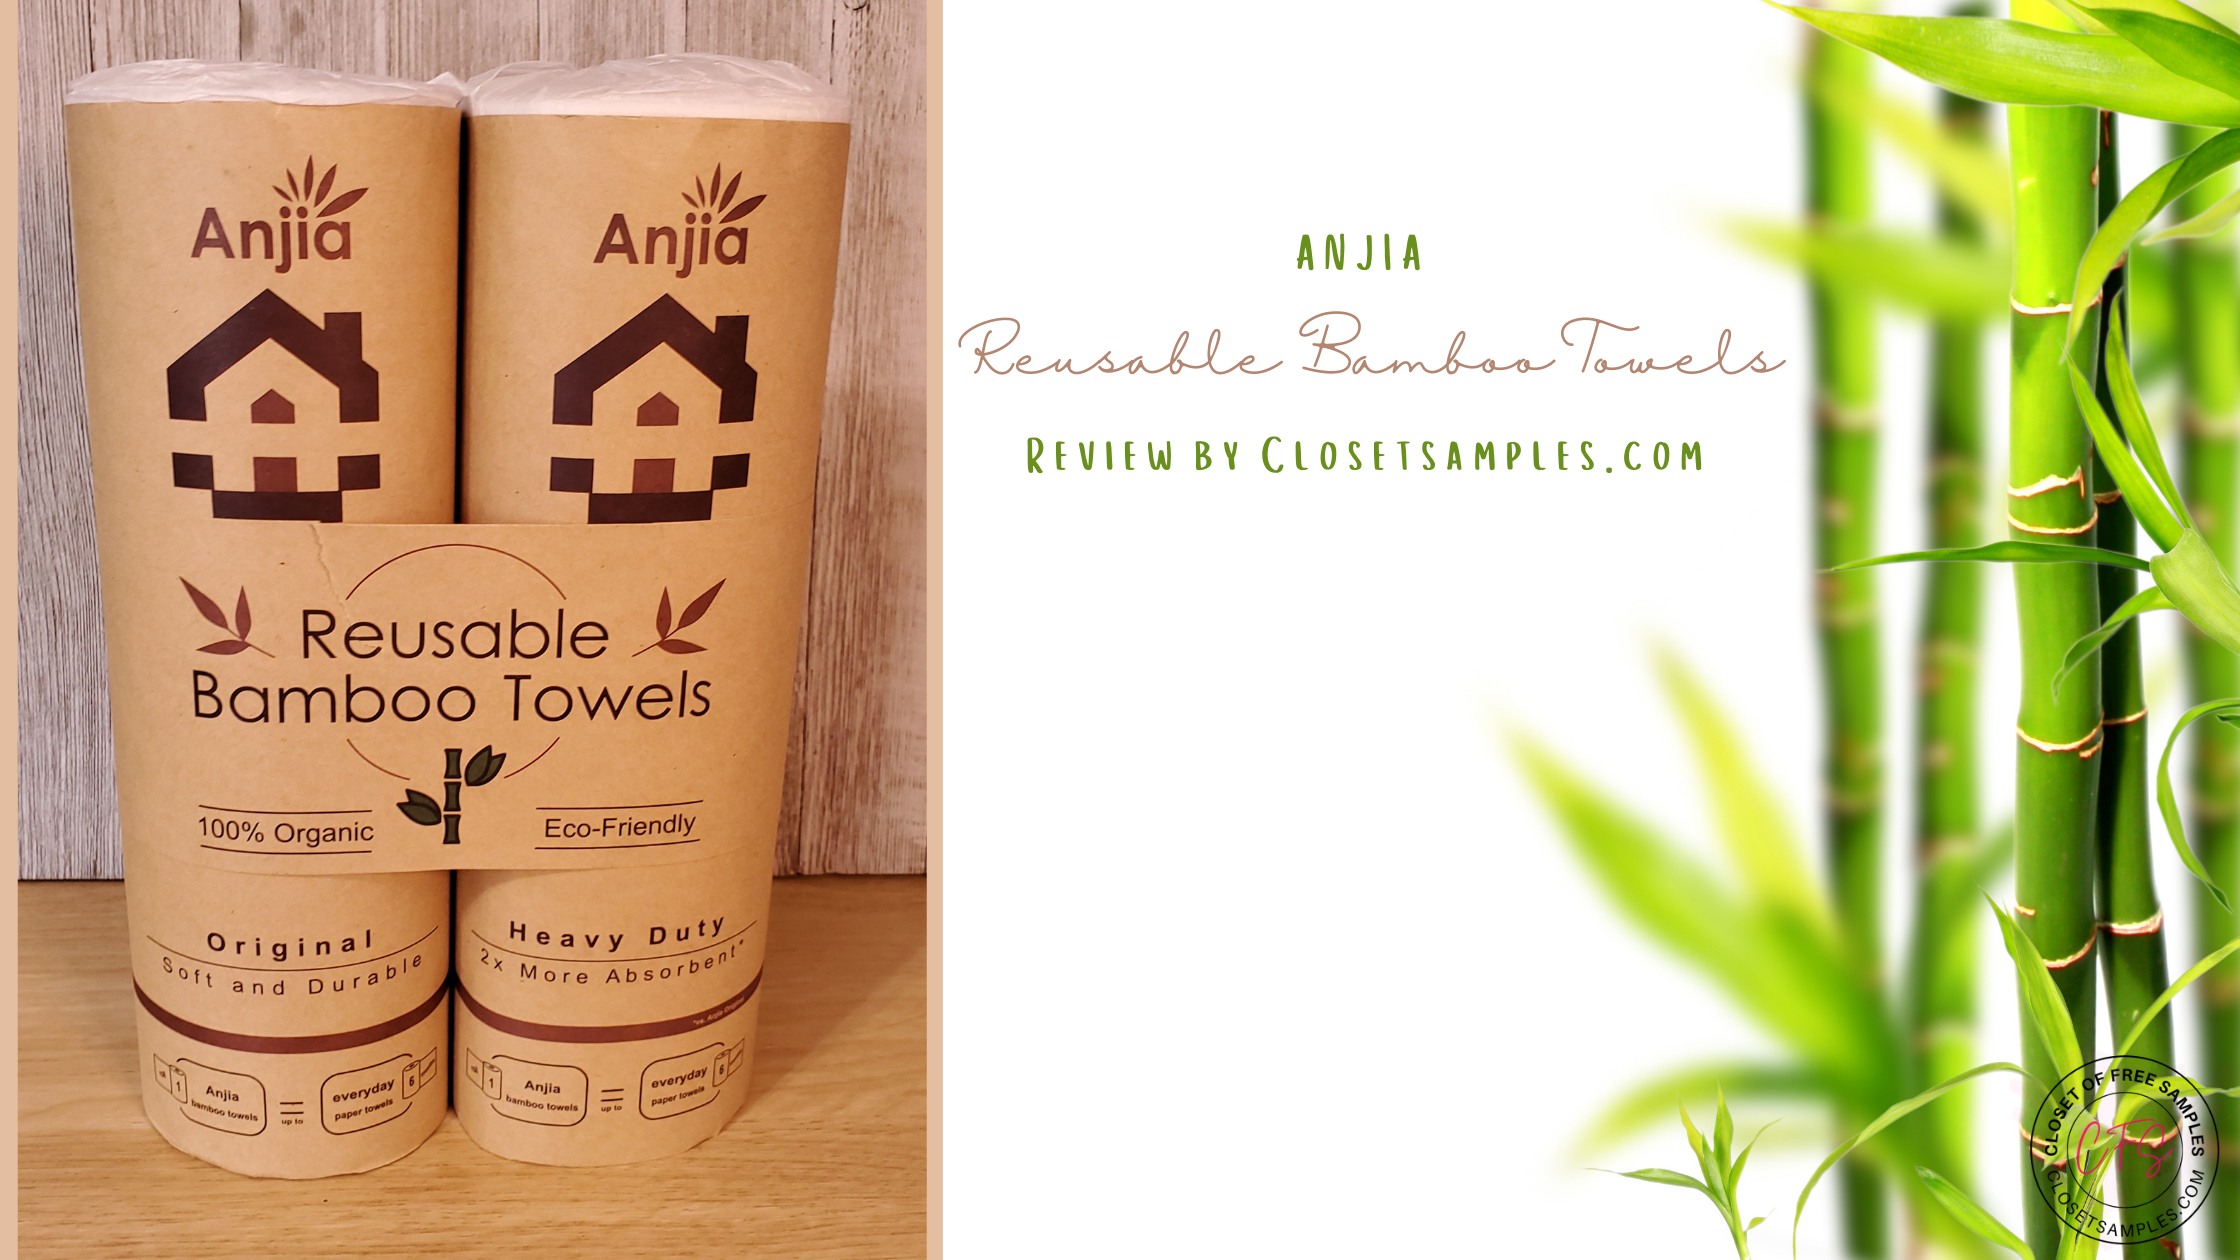 Anjia Reusable Bamboo Towels Review